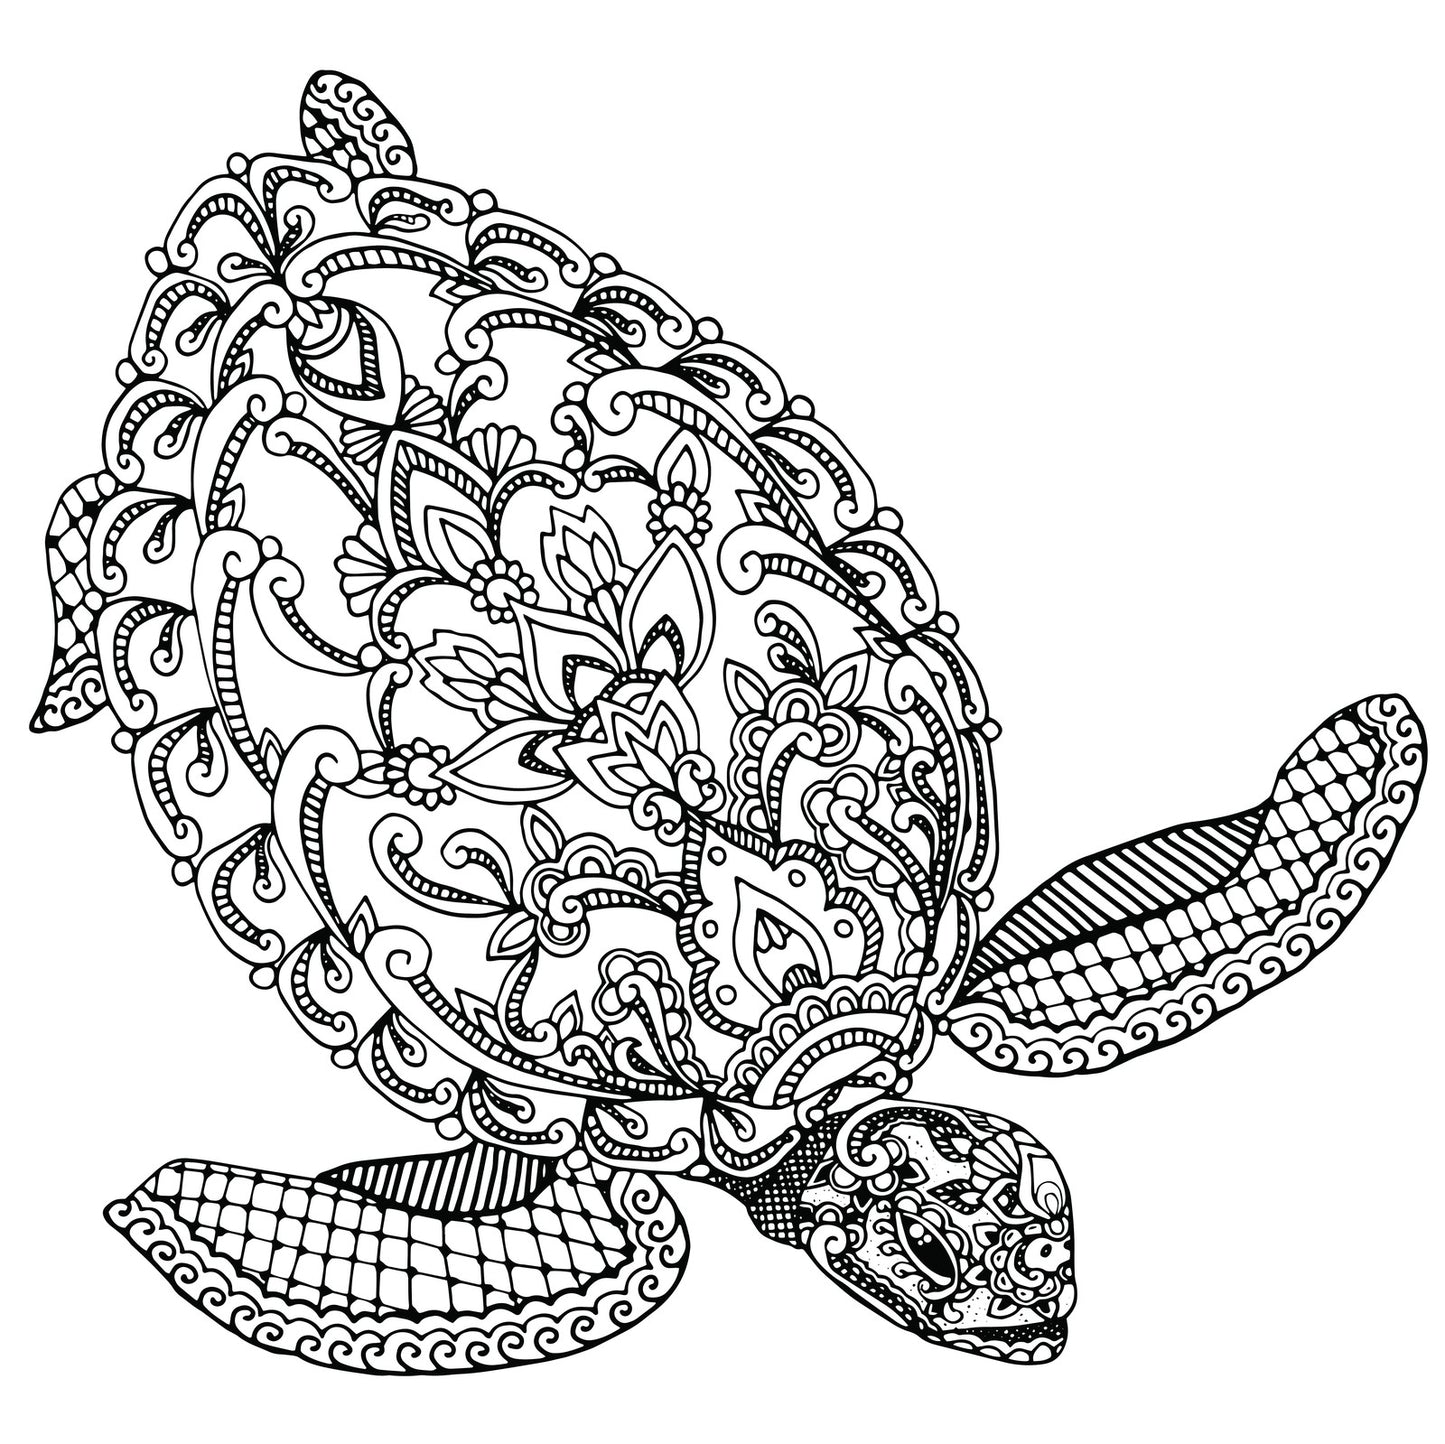 Turtles - Relaxing Coloring (PDF Book) With Tortoises and Sea Turtles